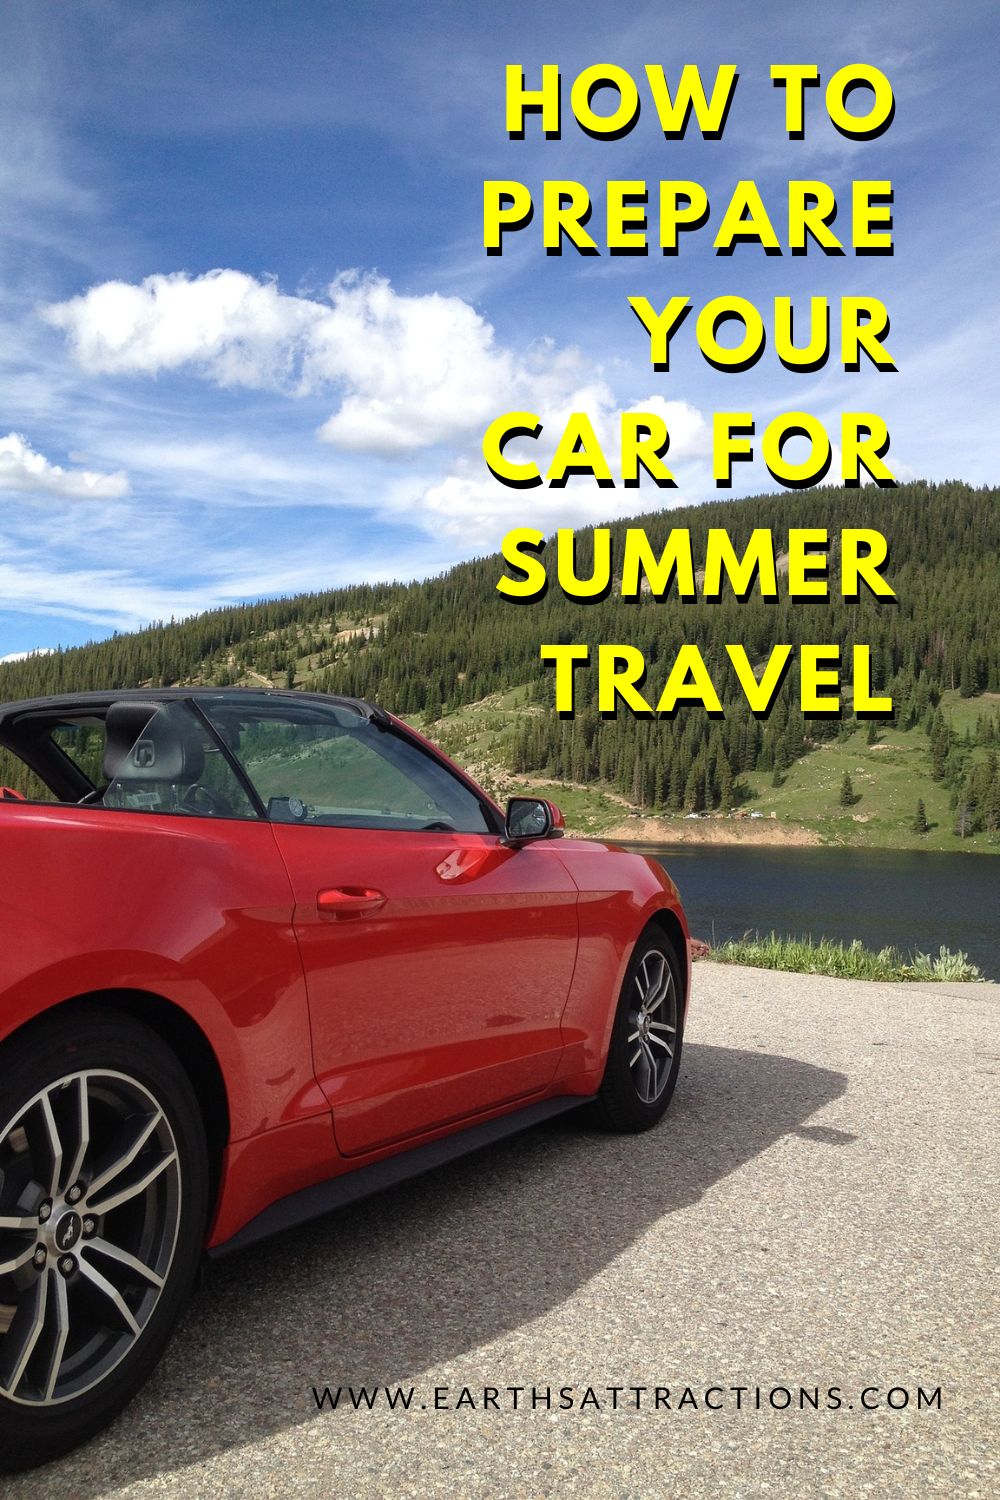 How to prepare your car for summer travel. Discover the car maintenance guide for summer trips. How to get ready for a summer roadtrip #summertravel #cartrips #auto #cartips #cartraveltips #summerroadtrip #roadtrip #roadtrippreparation